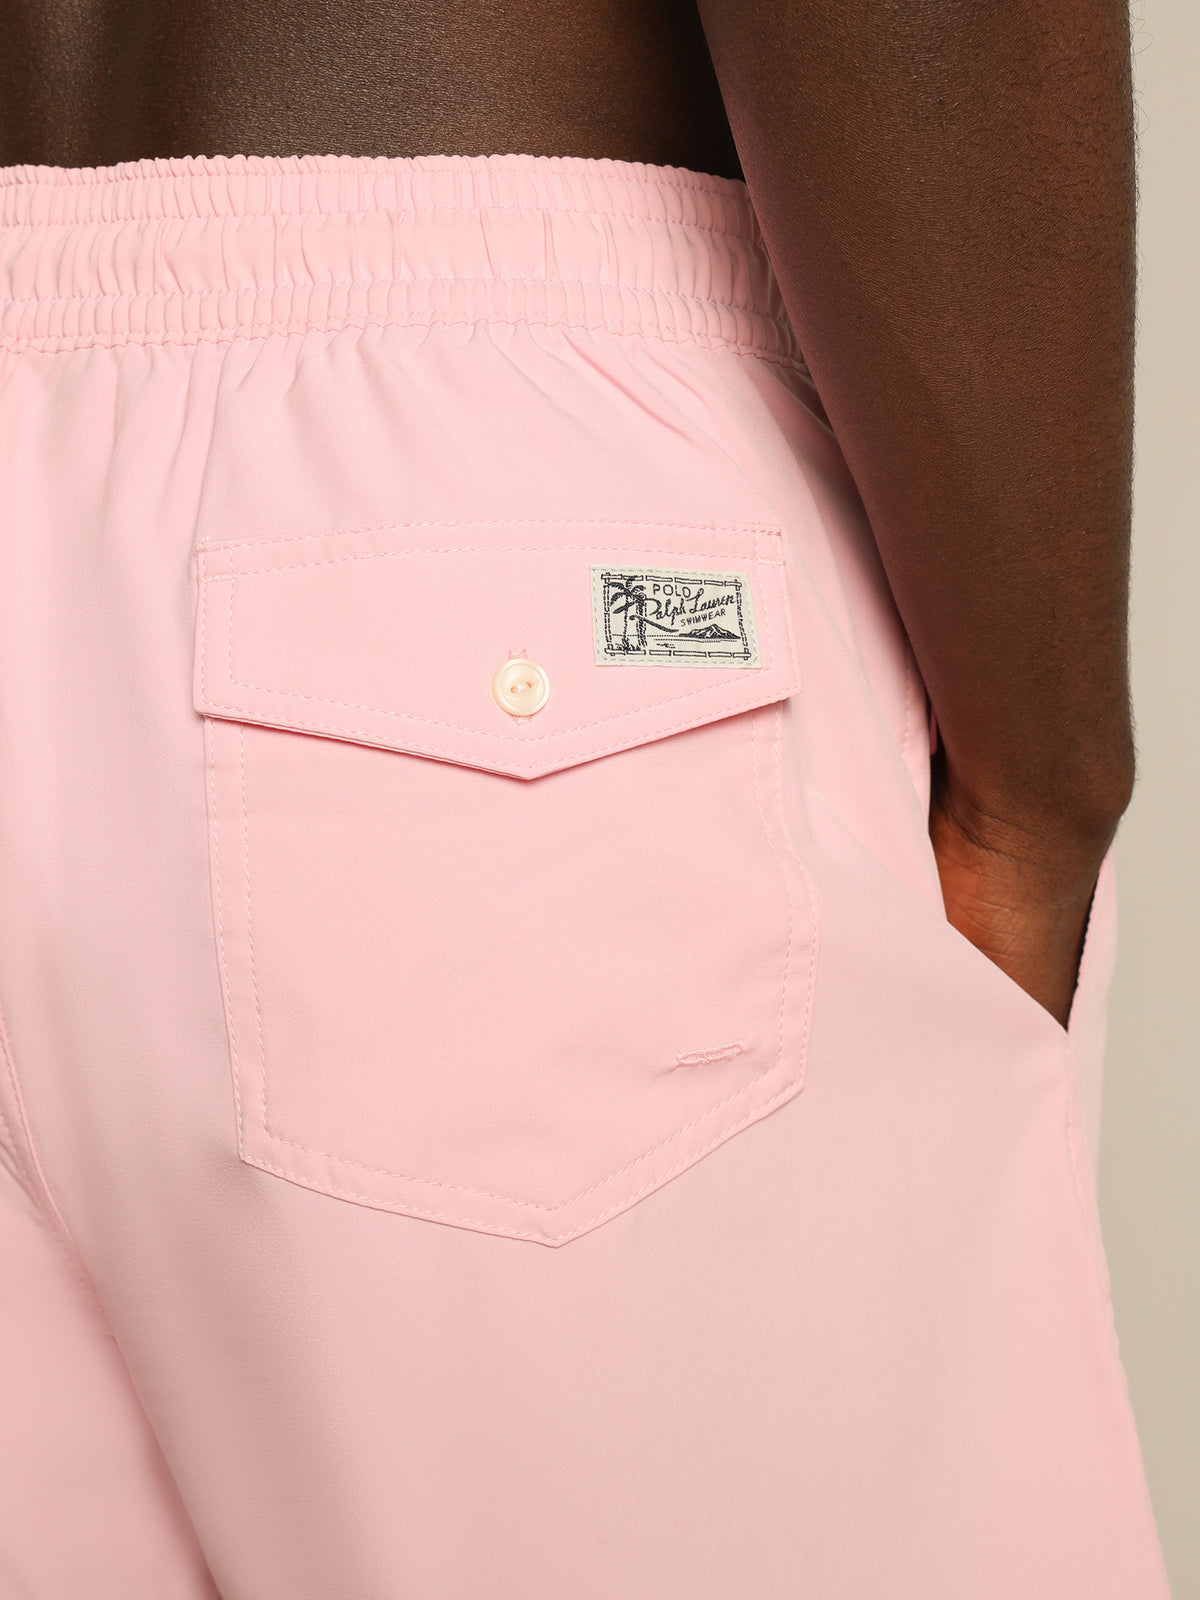 Polo Traveller Swim Shorts in Pink